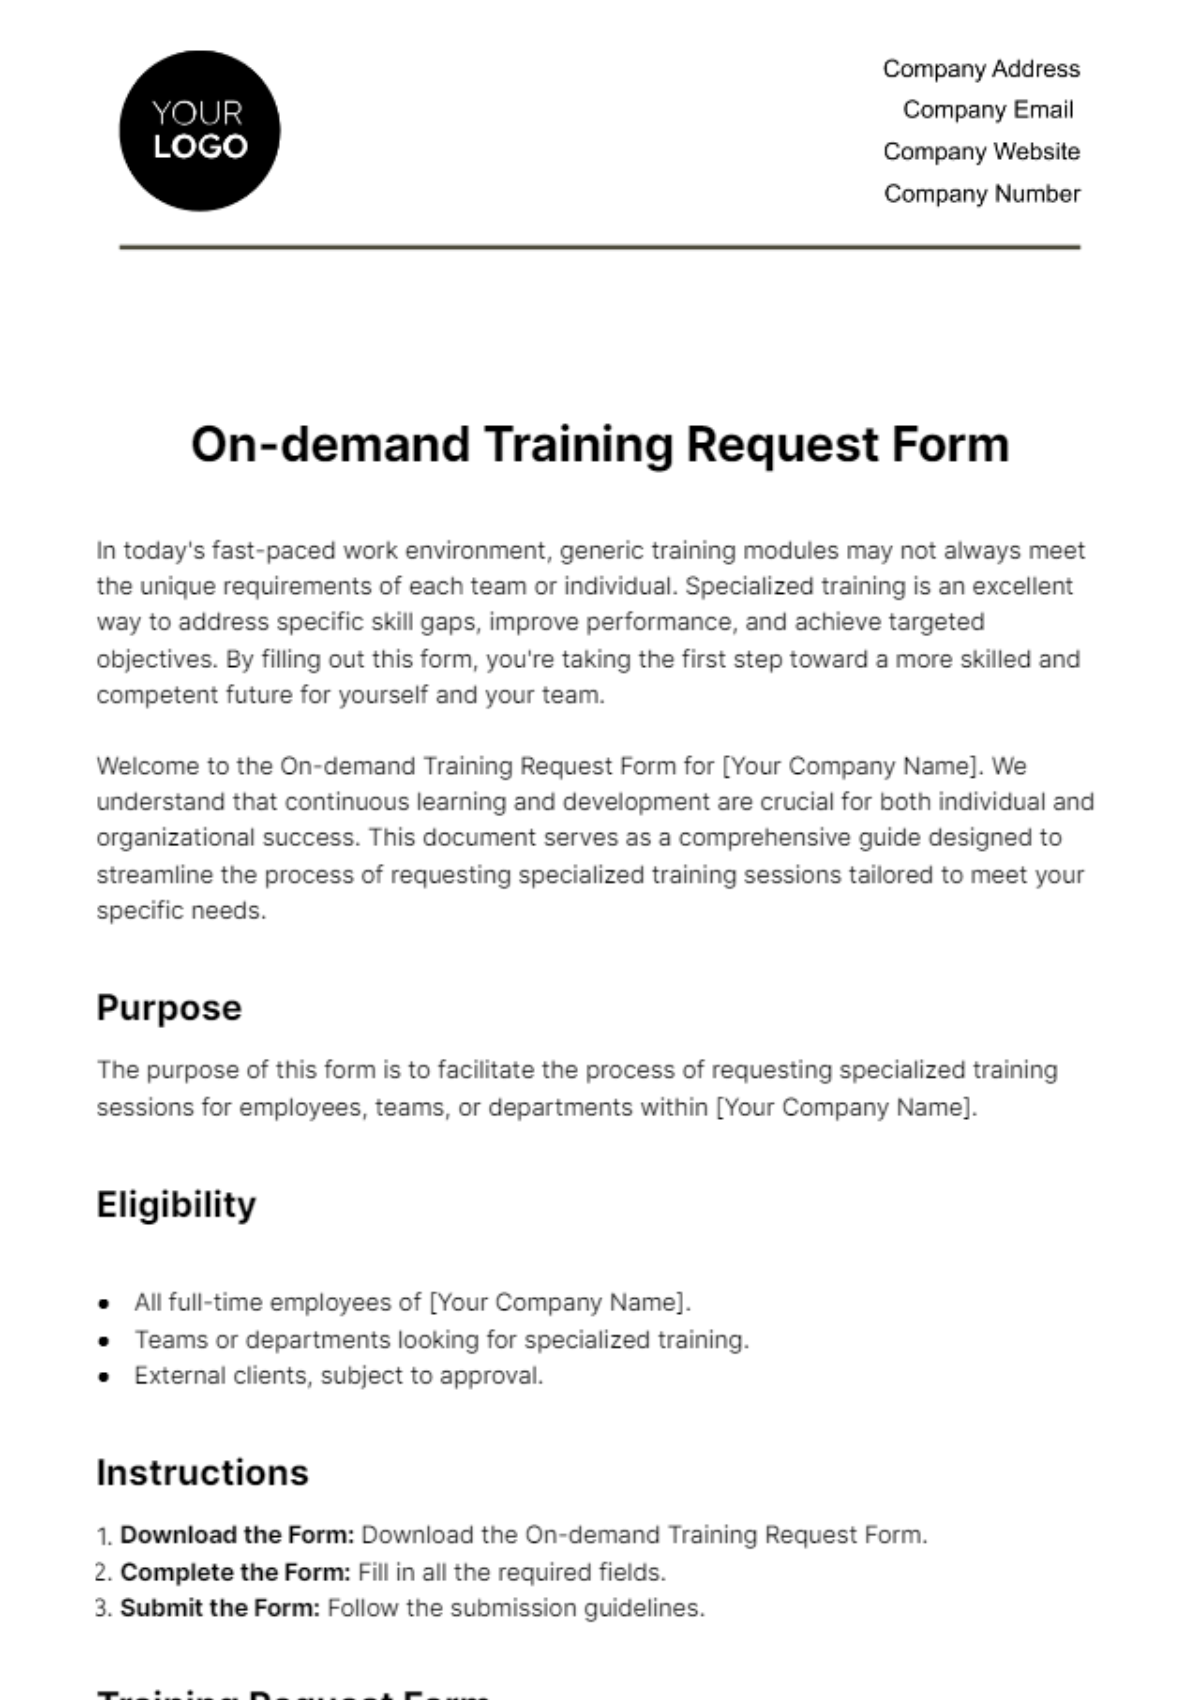 On-demand Training Request Form HR Template